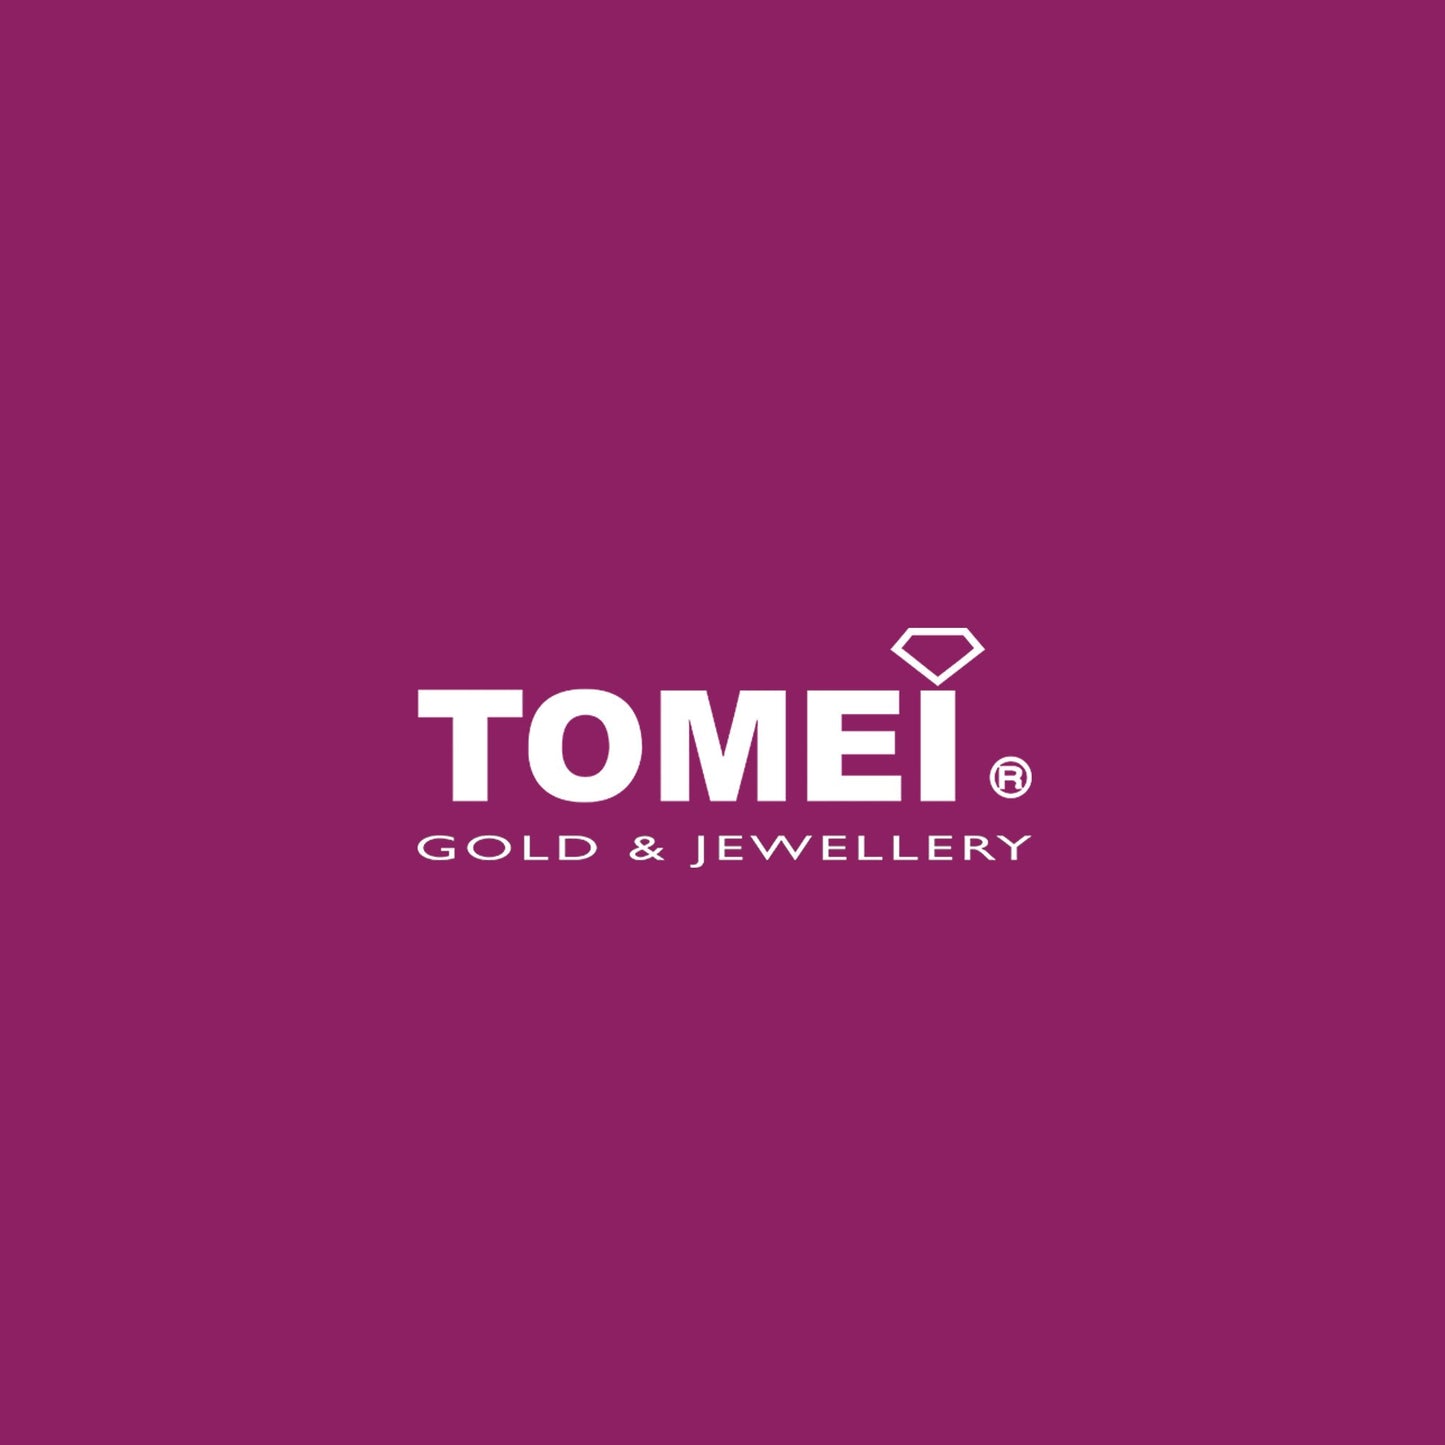 TOMEI Dainty Heart Beads Necklace, Yellow Gold 916